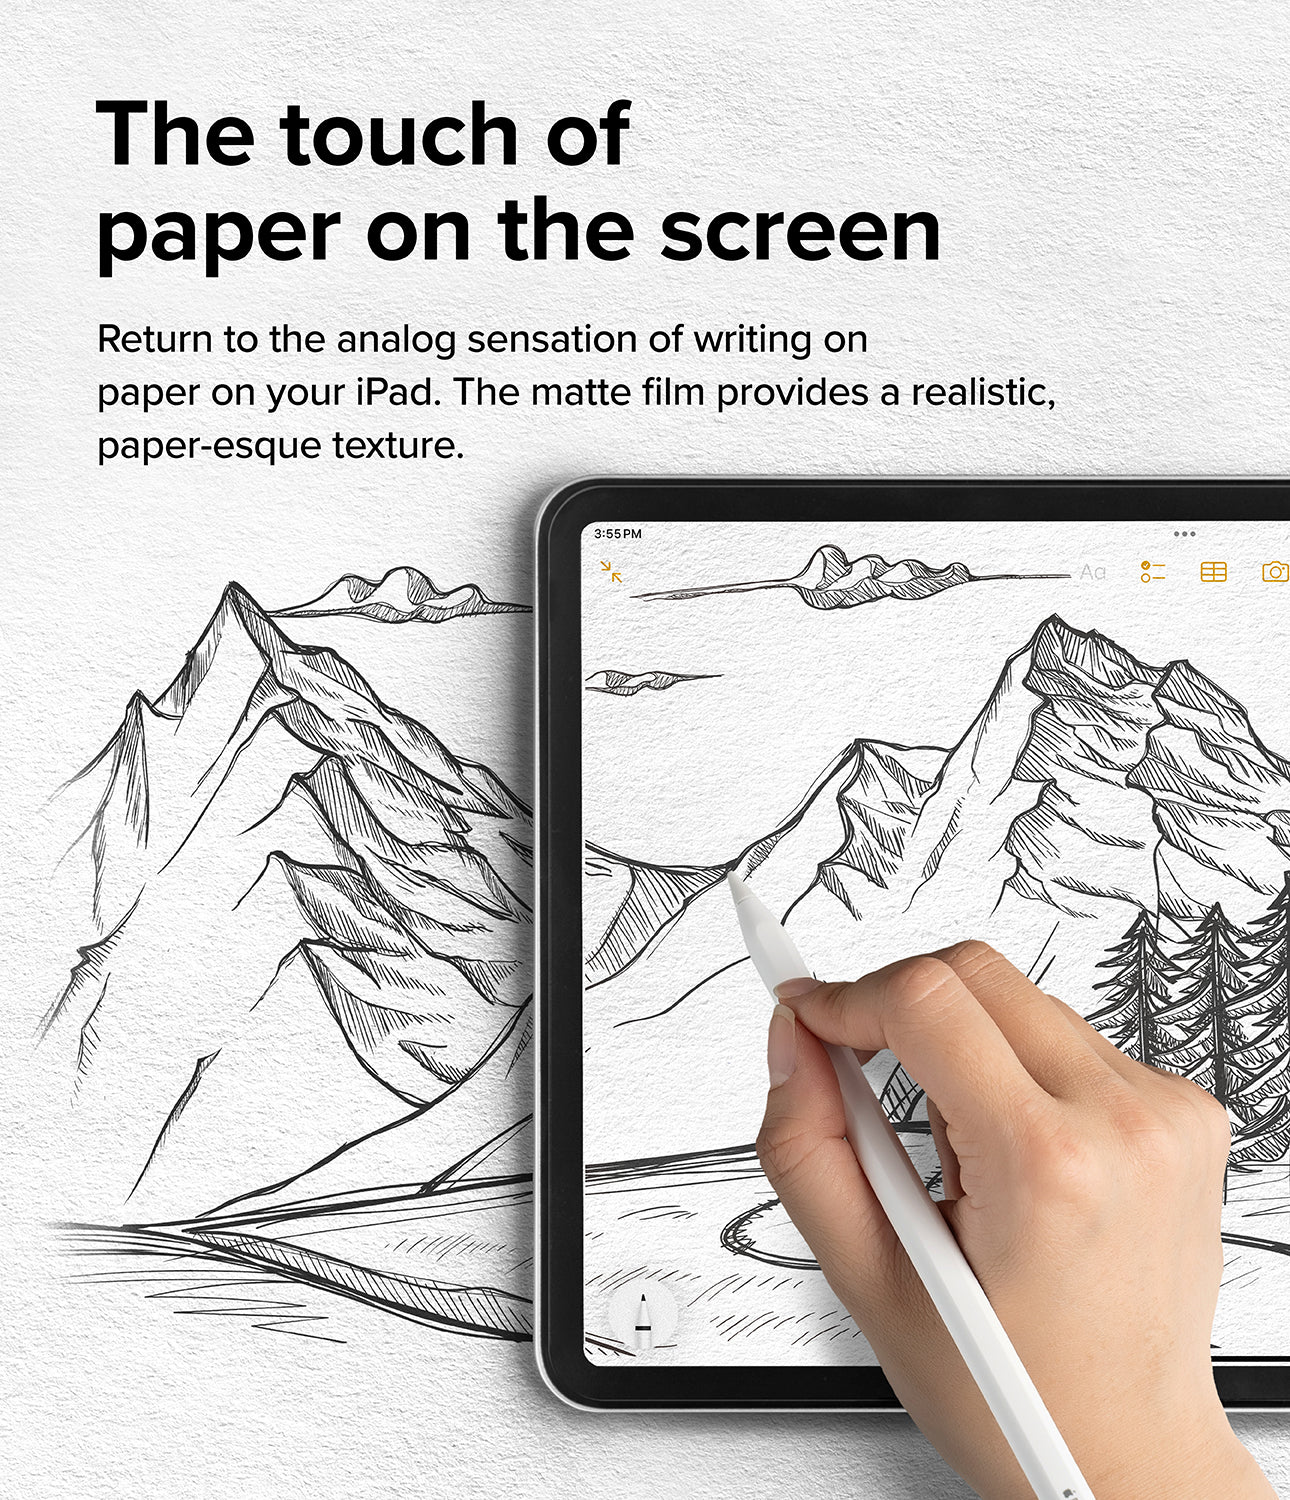 iPad Pro 13" (M4) Screen Protector | Paper Touch Film - Hard - The touch of paper on the screen. Return to the analog sensation of writing on paper on your iPad. The matte film provides a realistic, paper-esque texture.